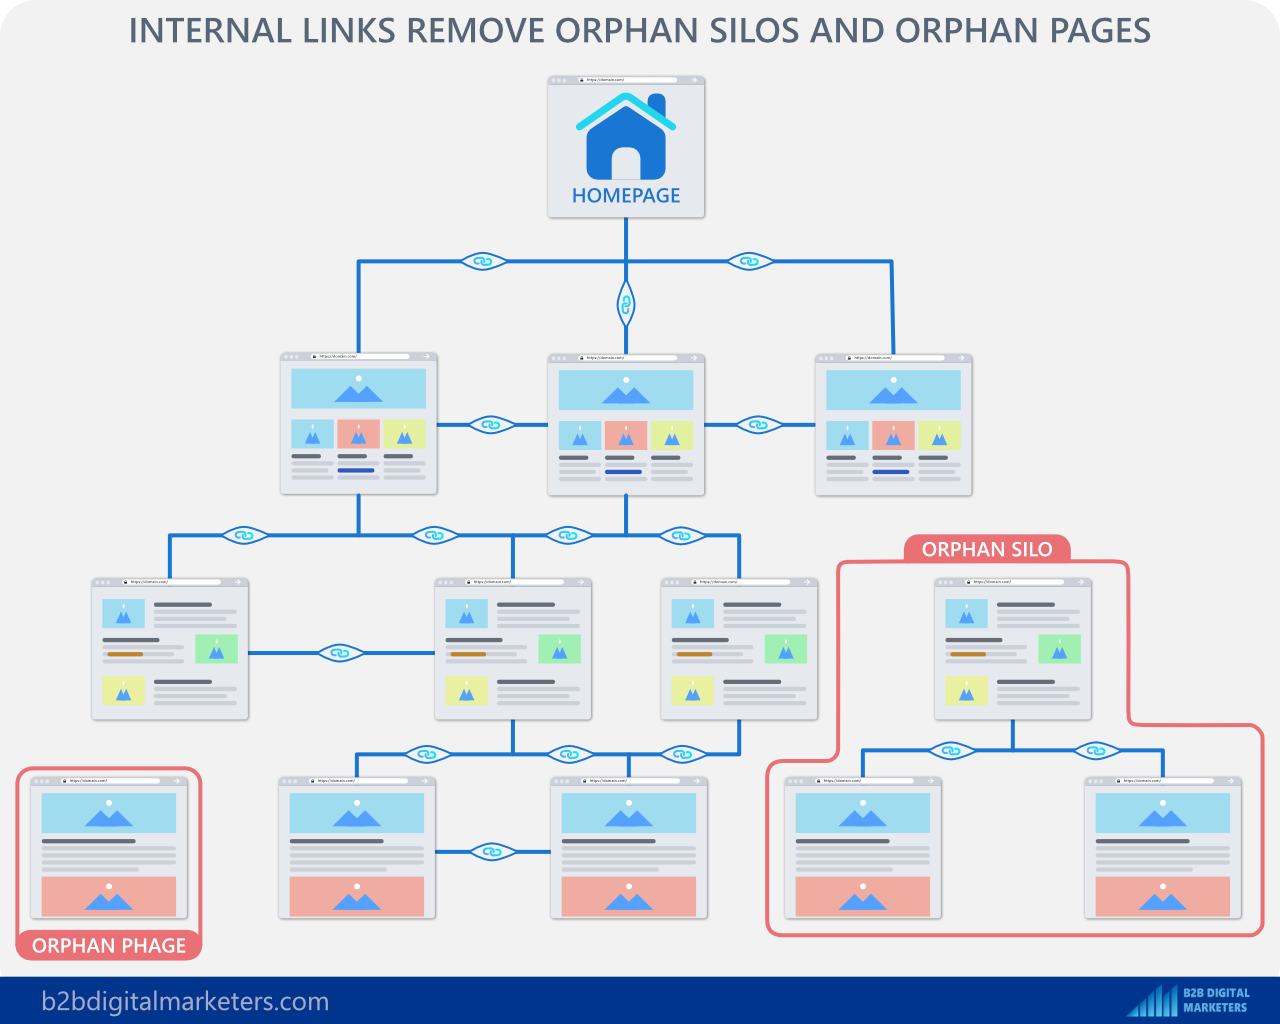 internal links helps remove orphan pages and silo of orphan pages to improve lead gen with seo